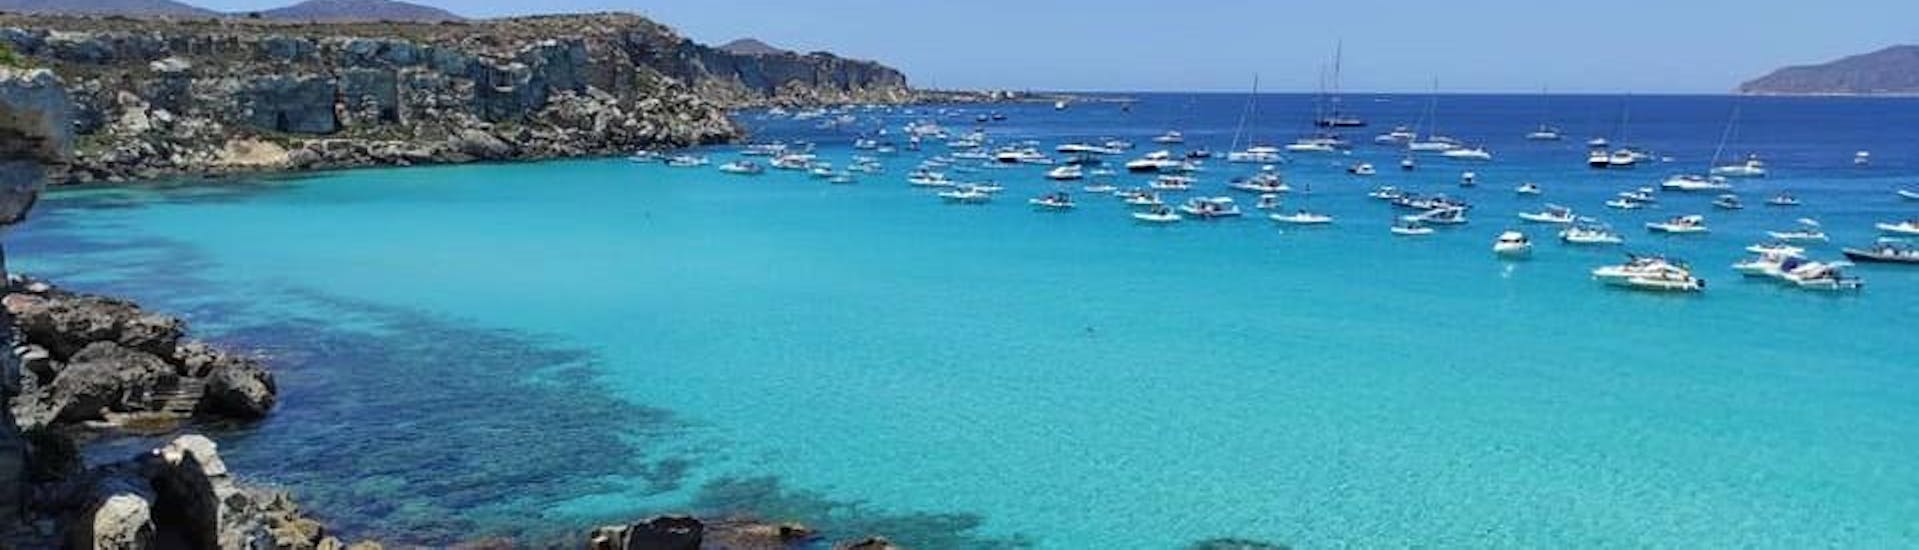 Beautiful Sicilian seascapes can be visited during a boat trip from Trapani with Egadi Sea & Boat.